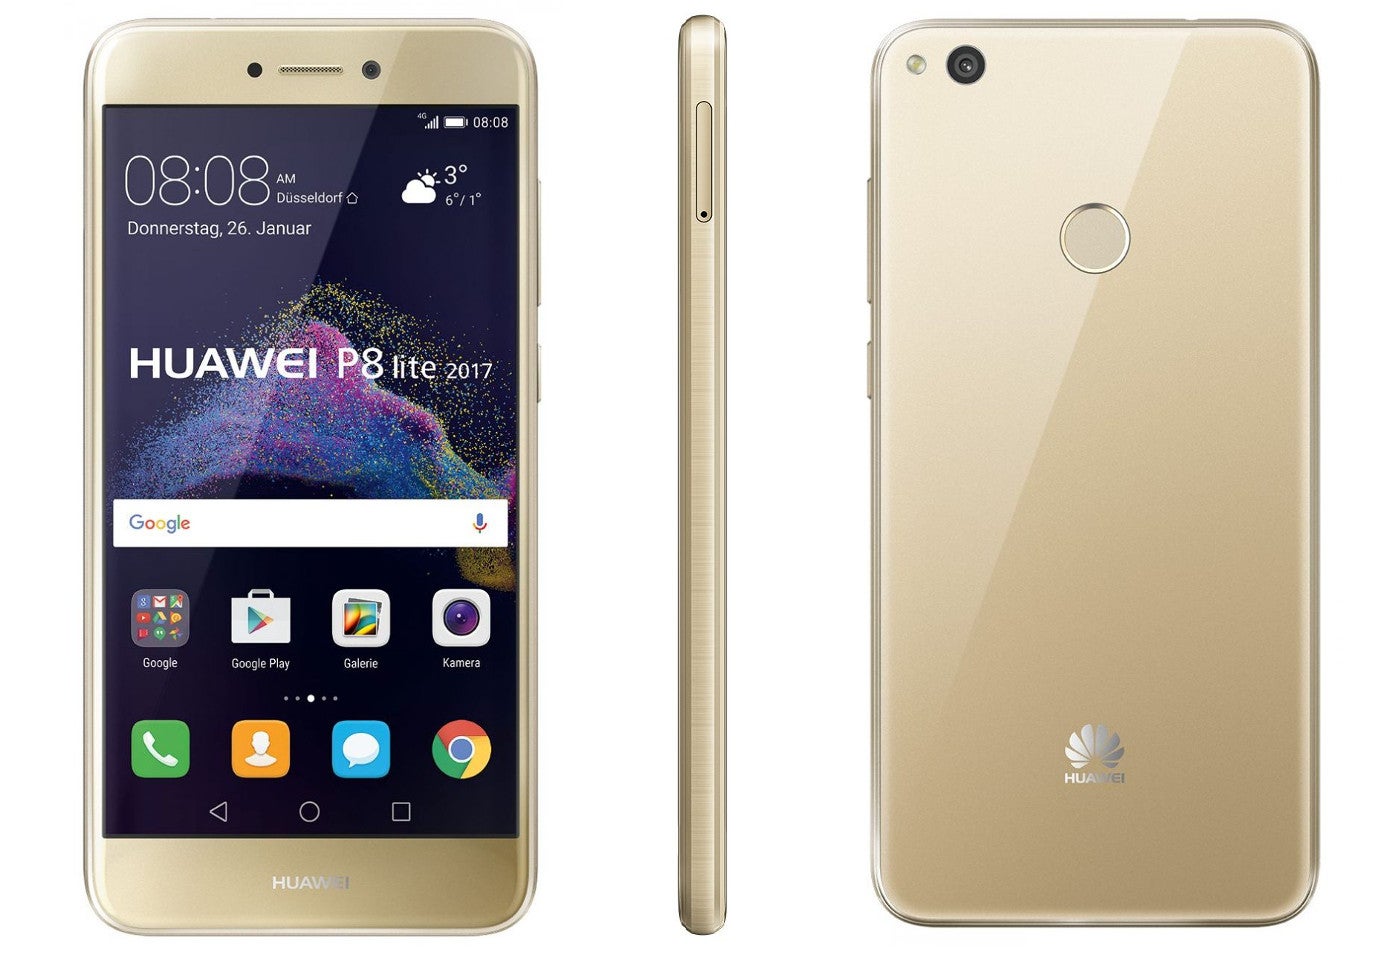 stopverf personeel Reserve Huawei P8 lite (2017) introduced with Kirin 655 chipset, Android 7.0 Nougat  - PhoneArena